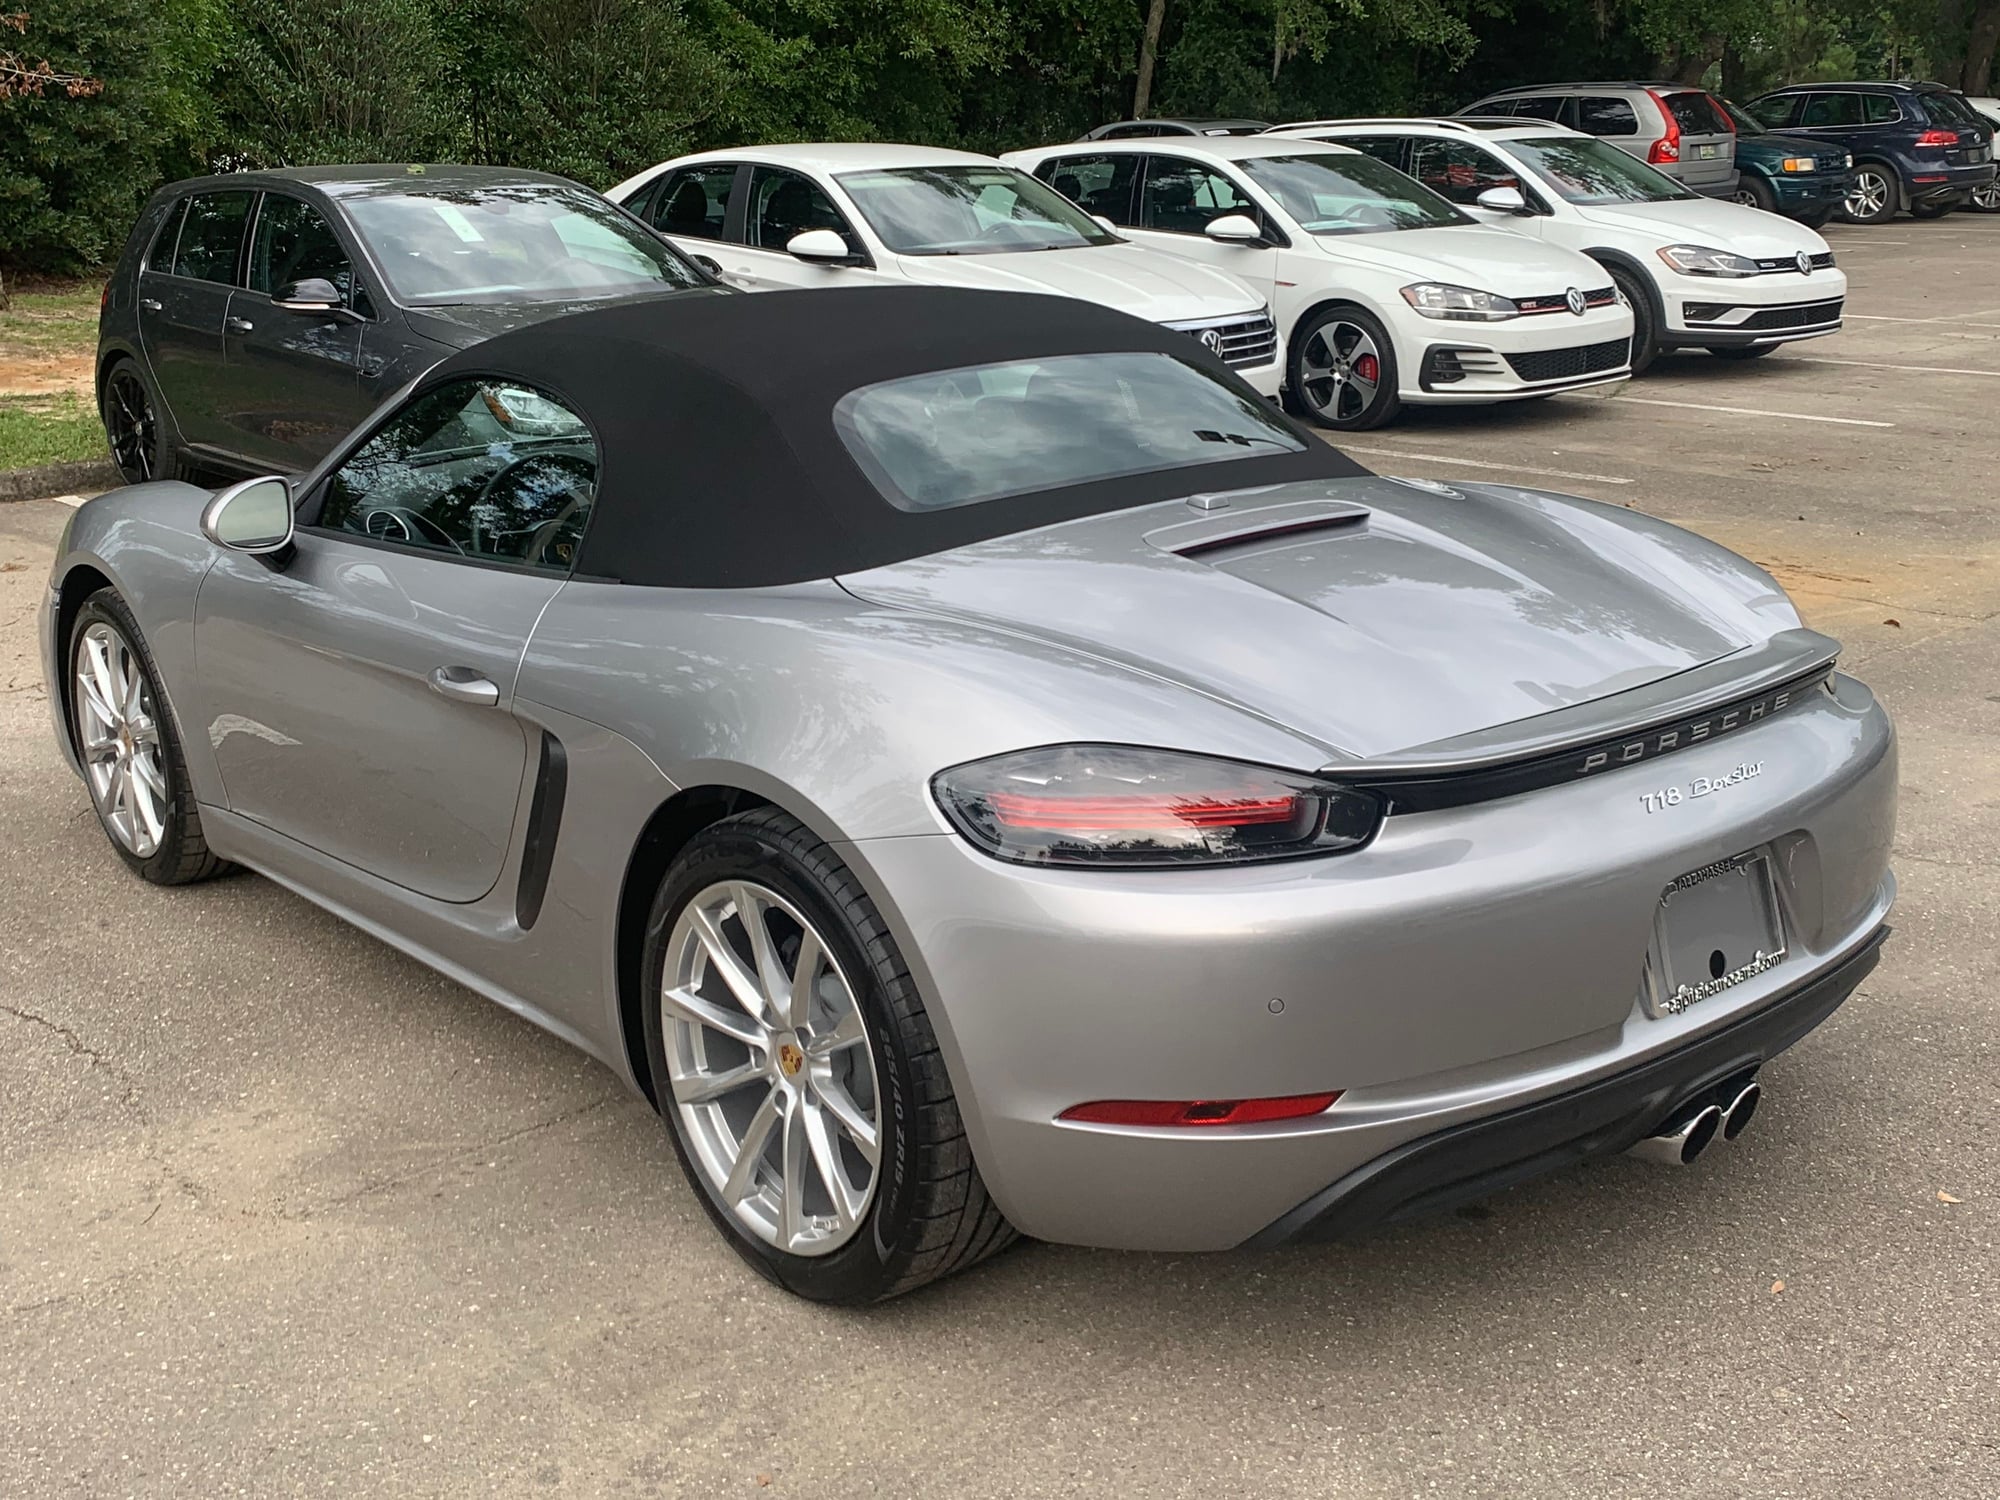 2018 Porsche 718 Boxster - 2018 718 Boxster Manual transmission in Excellent condition 2700 miles CPO - Used - VIN WP0CA2A80JS210260 - 2,671 Miles - 4 cyl - 2WD - Manual - Convertible - Silver - Tallahassee, FL 32304, United States